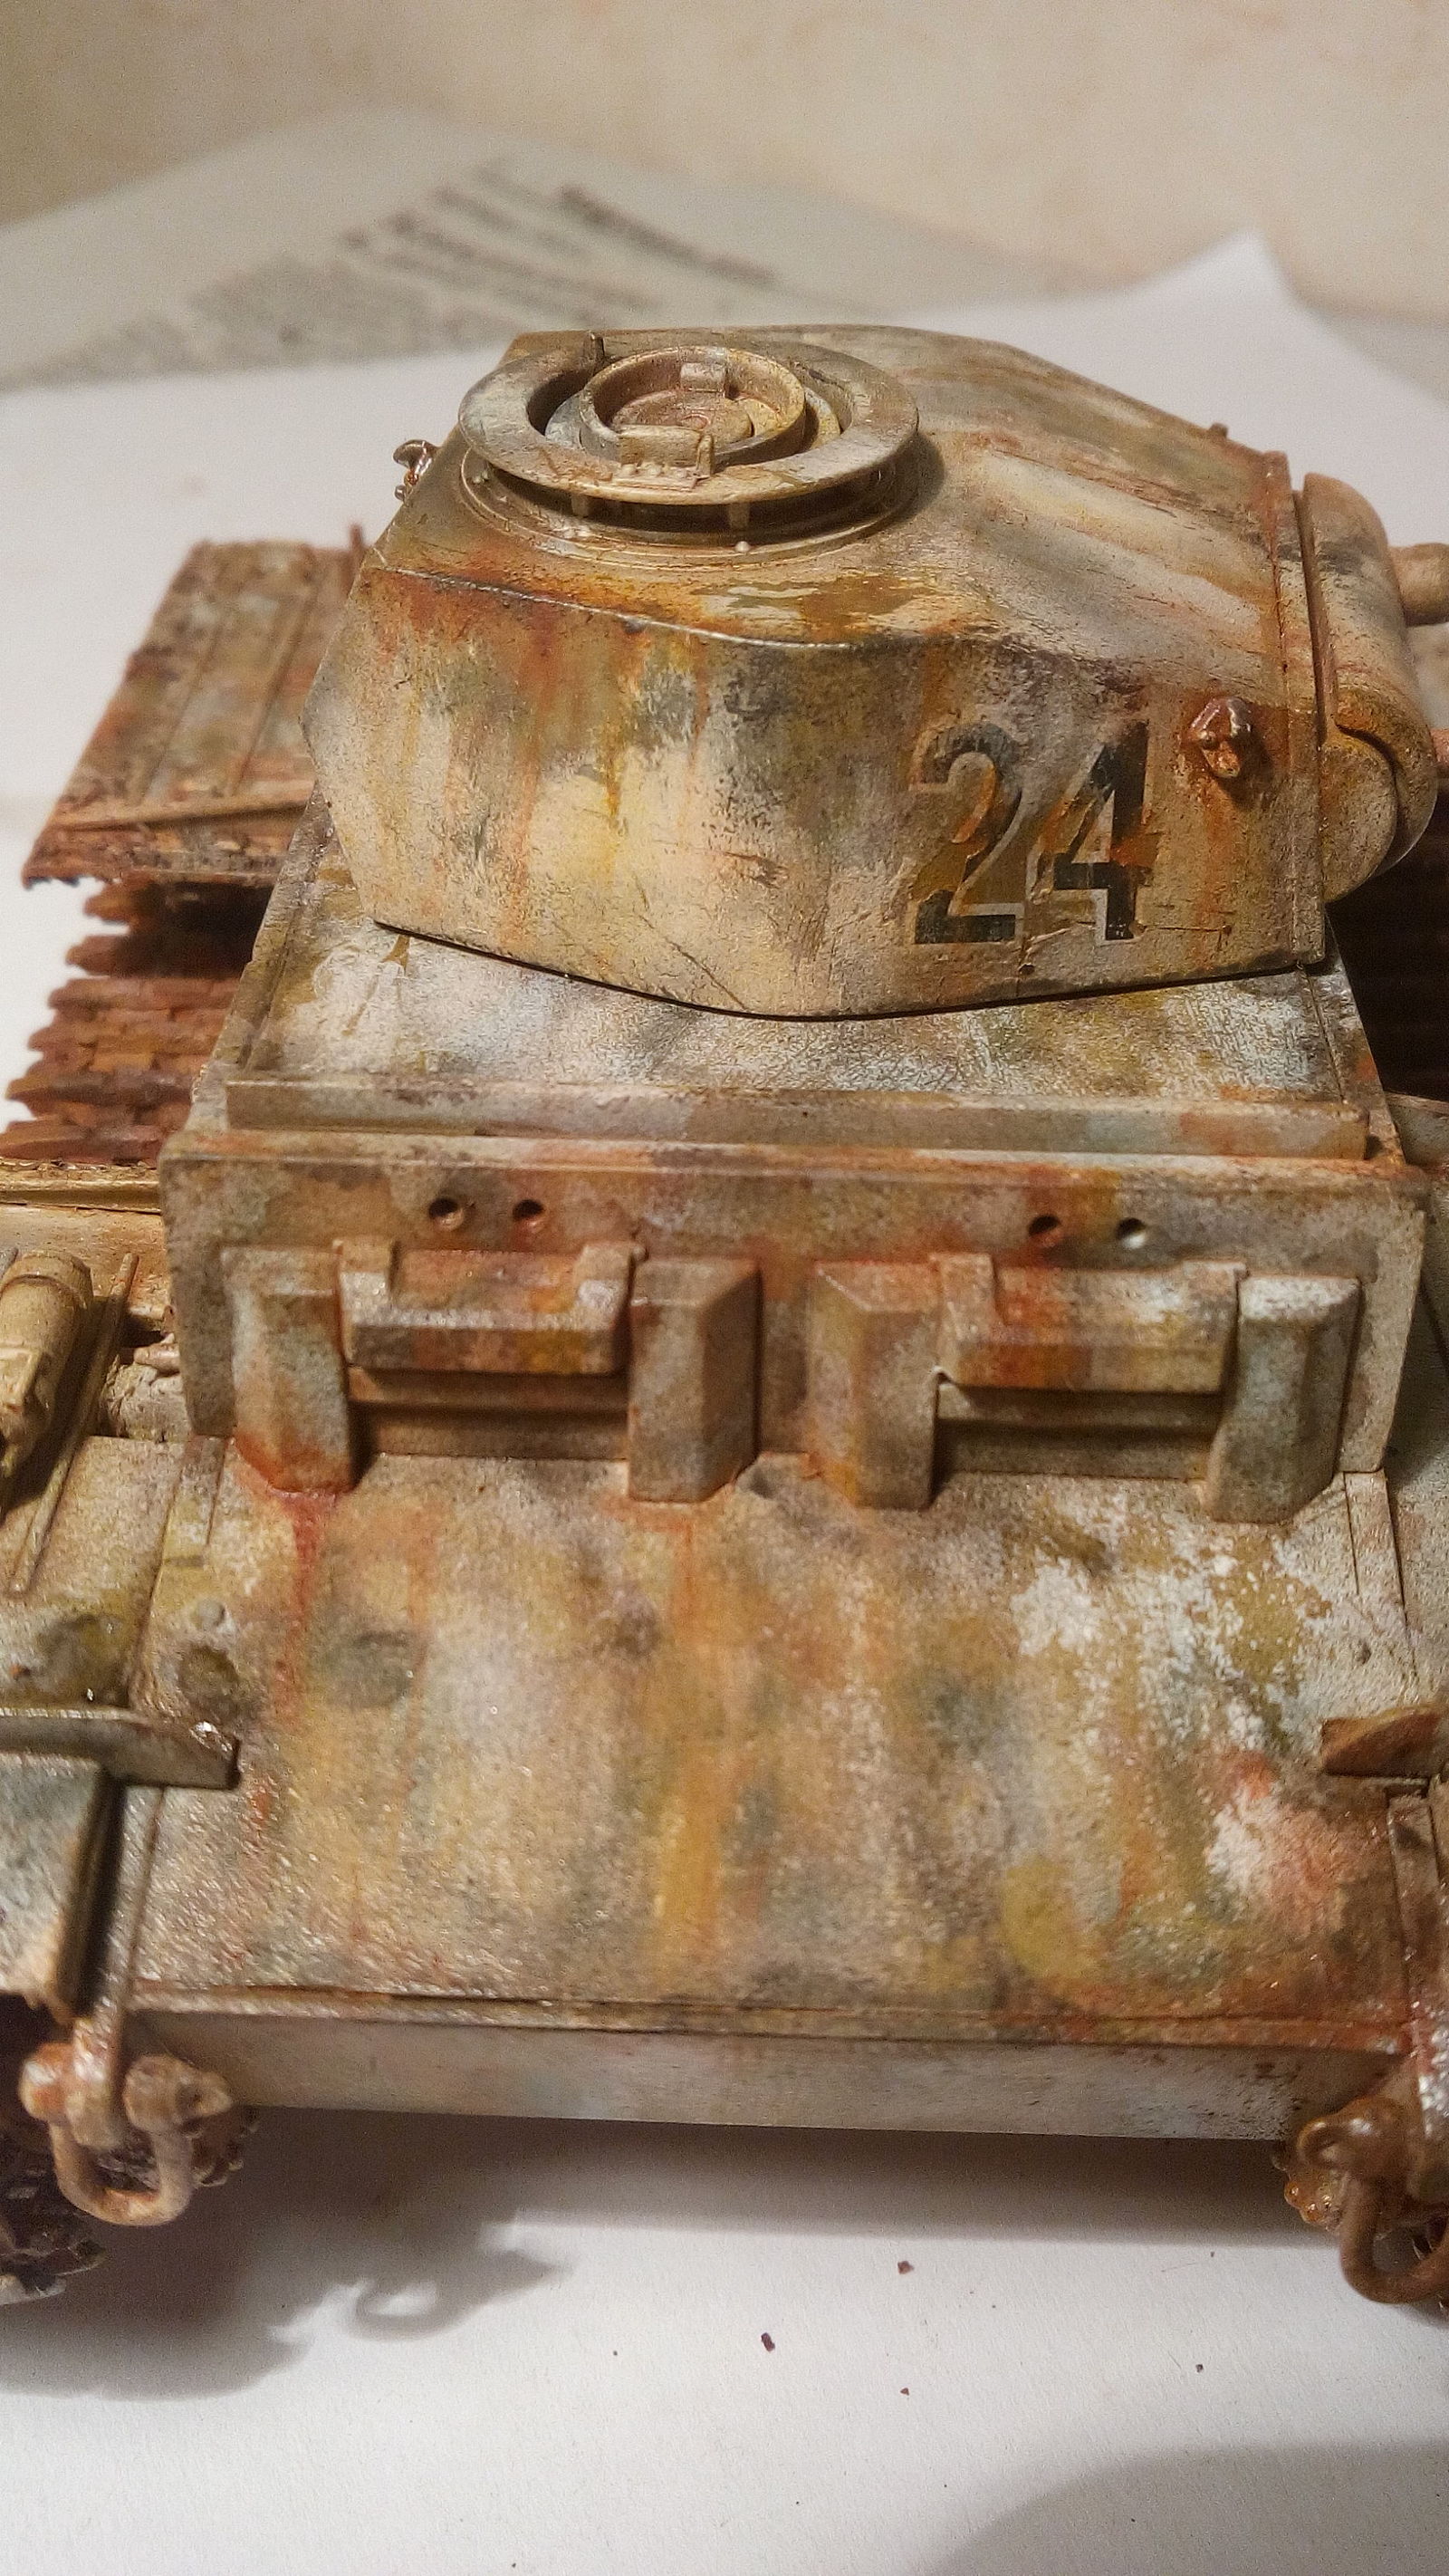 Learning to draw rust effects. - My, Airbrushing, BTT, Modeling, Tanks, Scale model, Prefabricated model, Assembly, Painting, Longpost